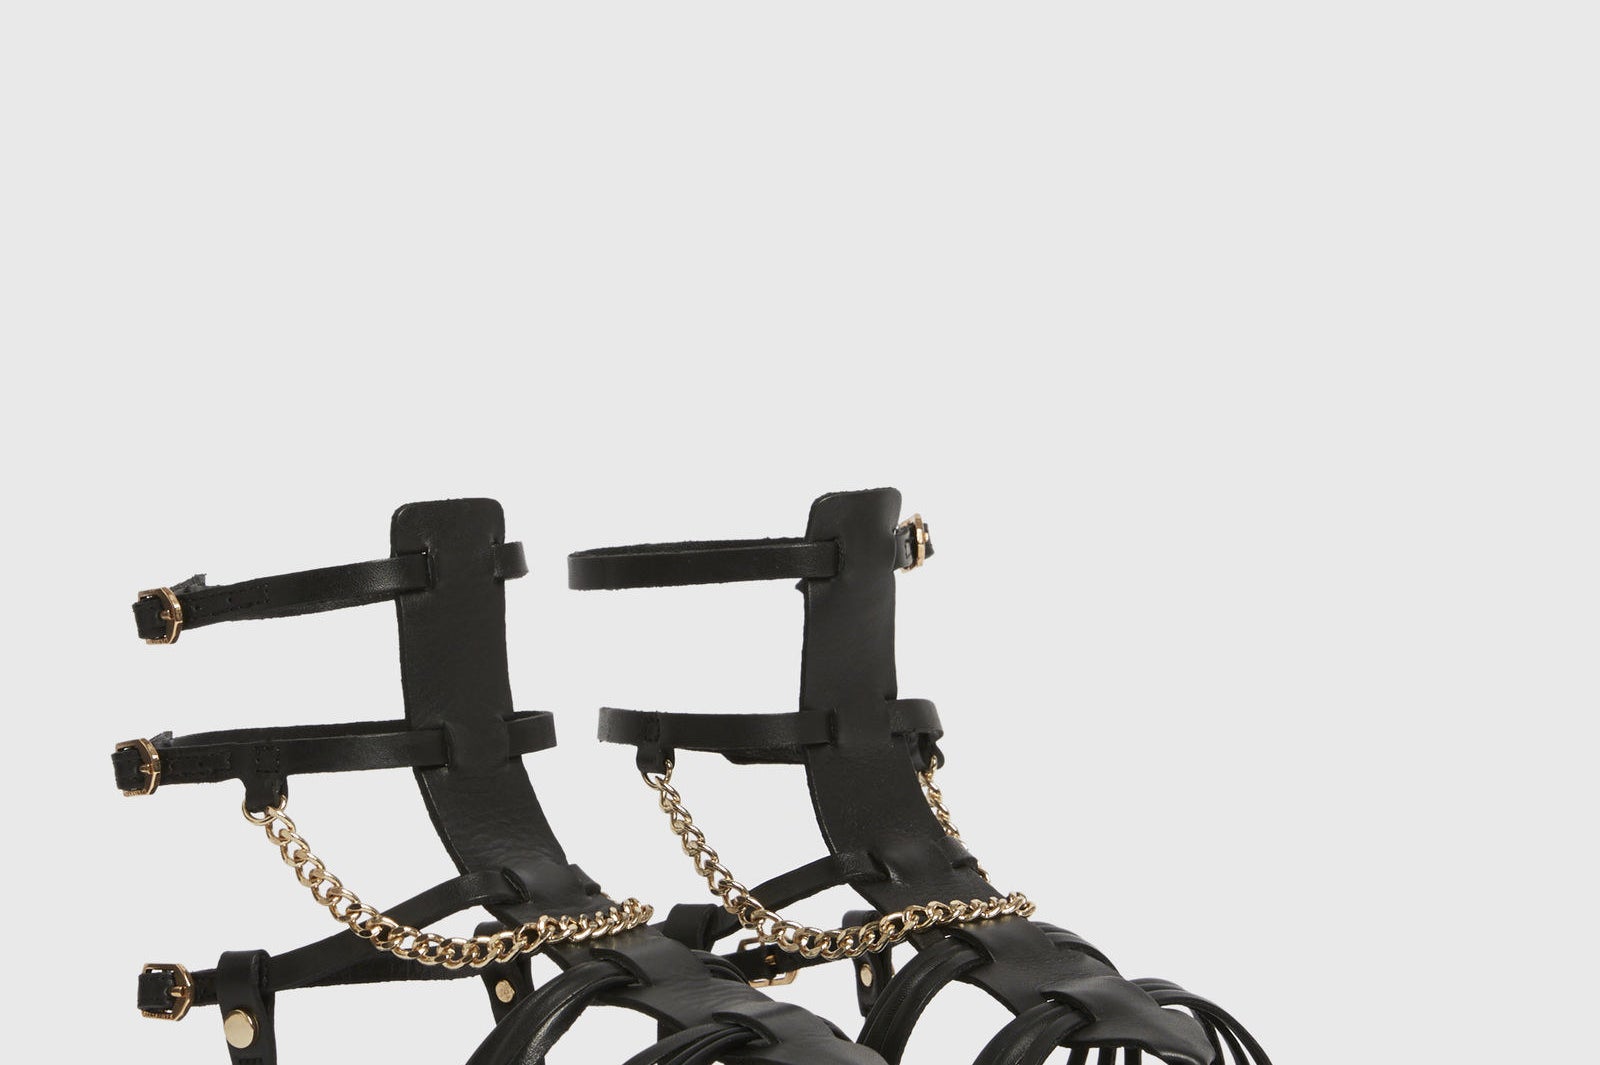 black gladiator style sandals with a gold tone chain as an accent and two straps that go right at the ankles